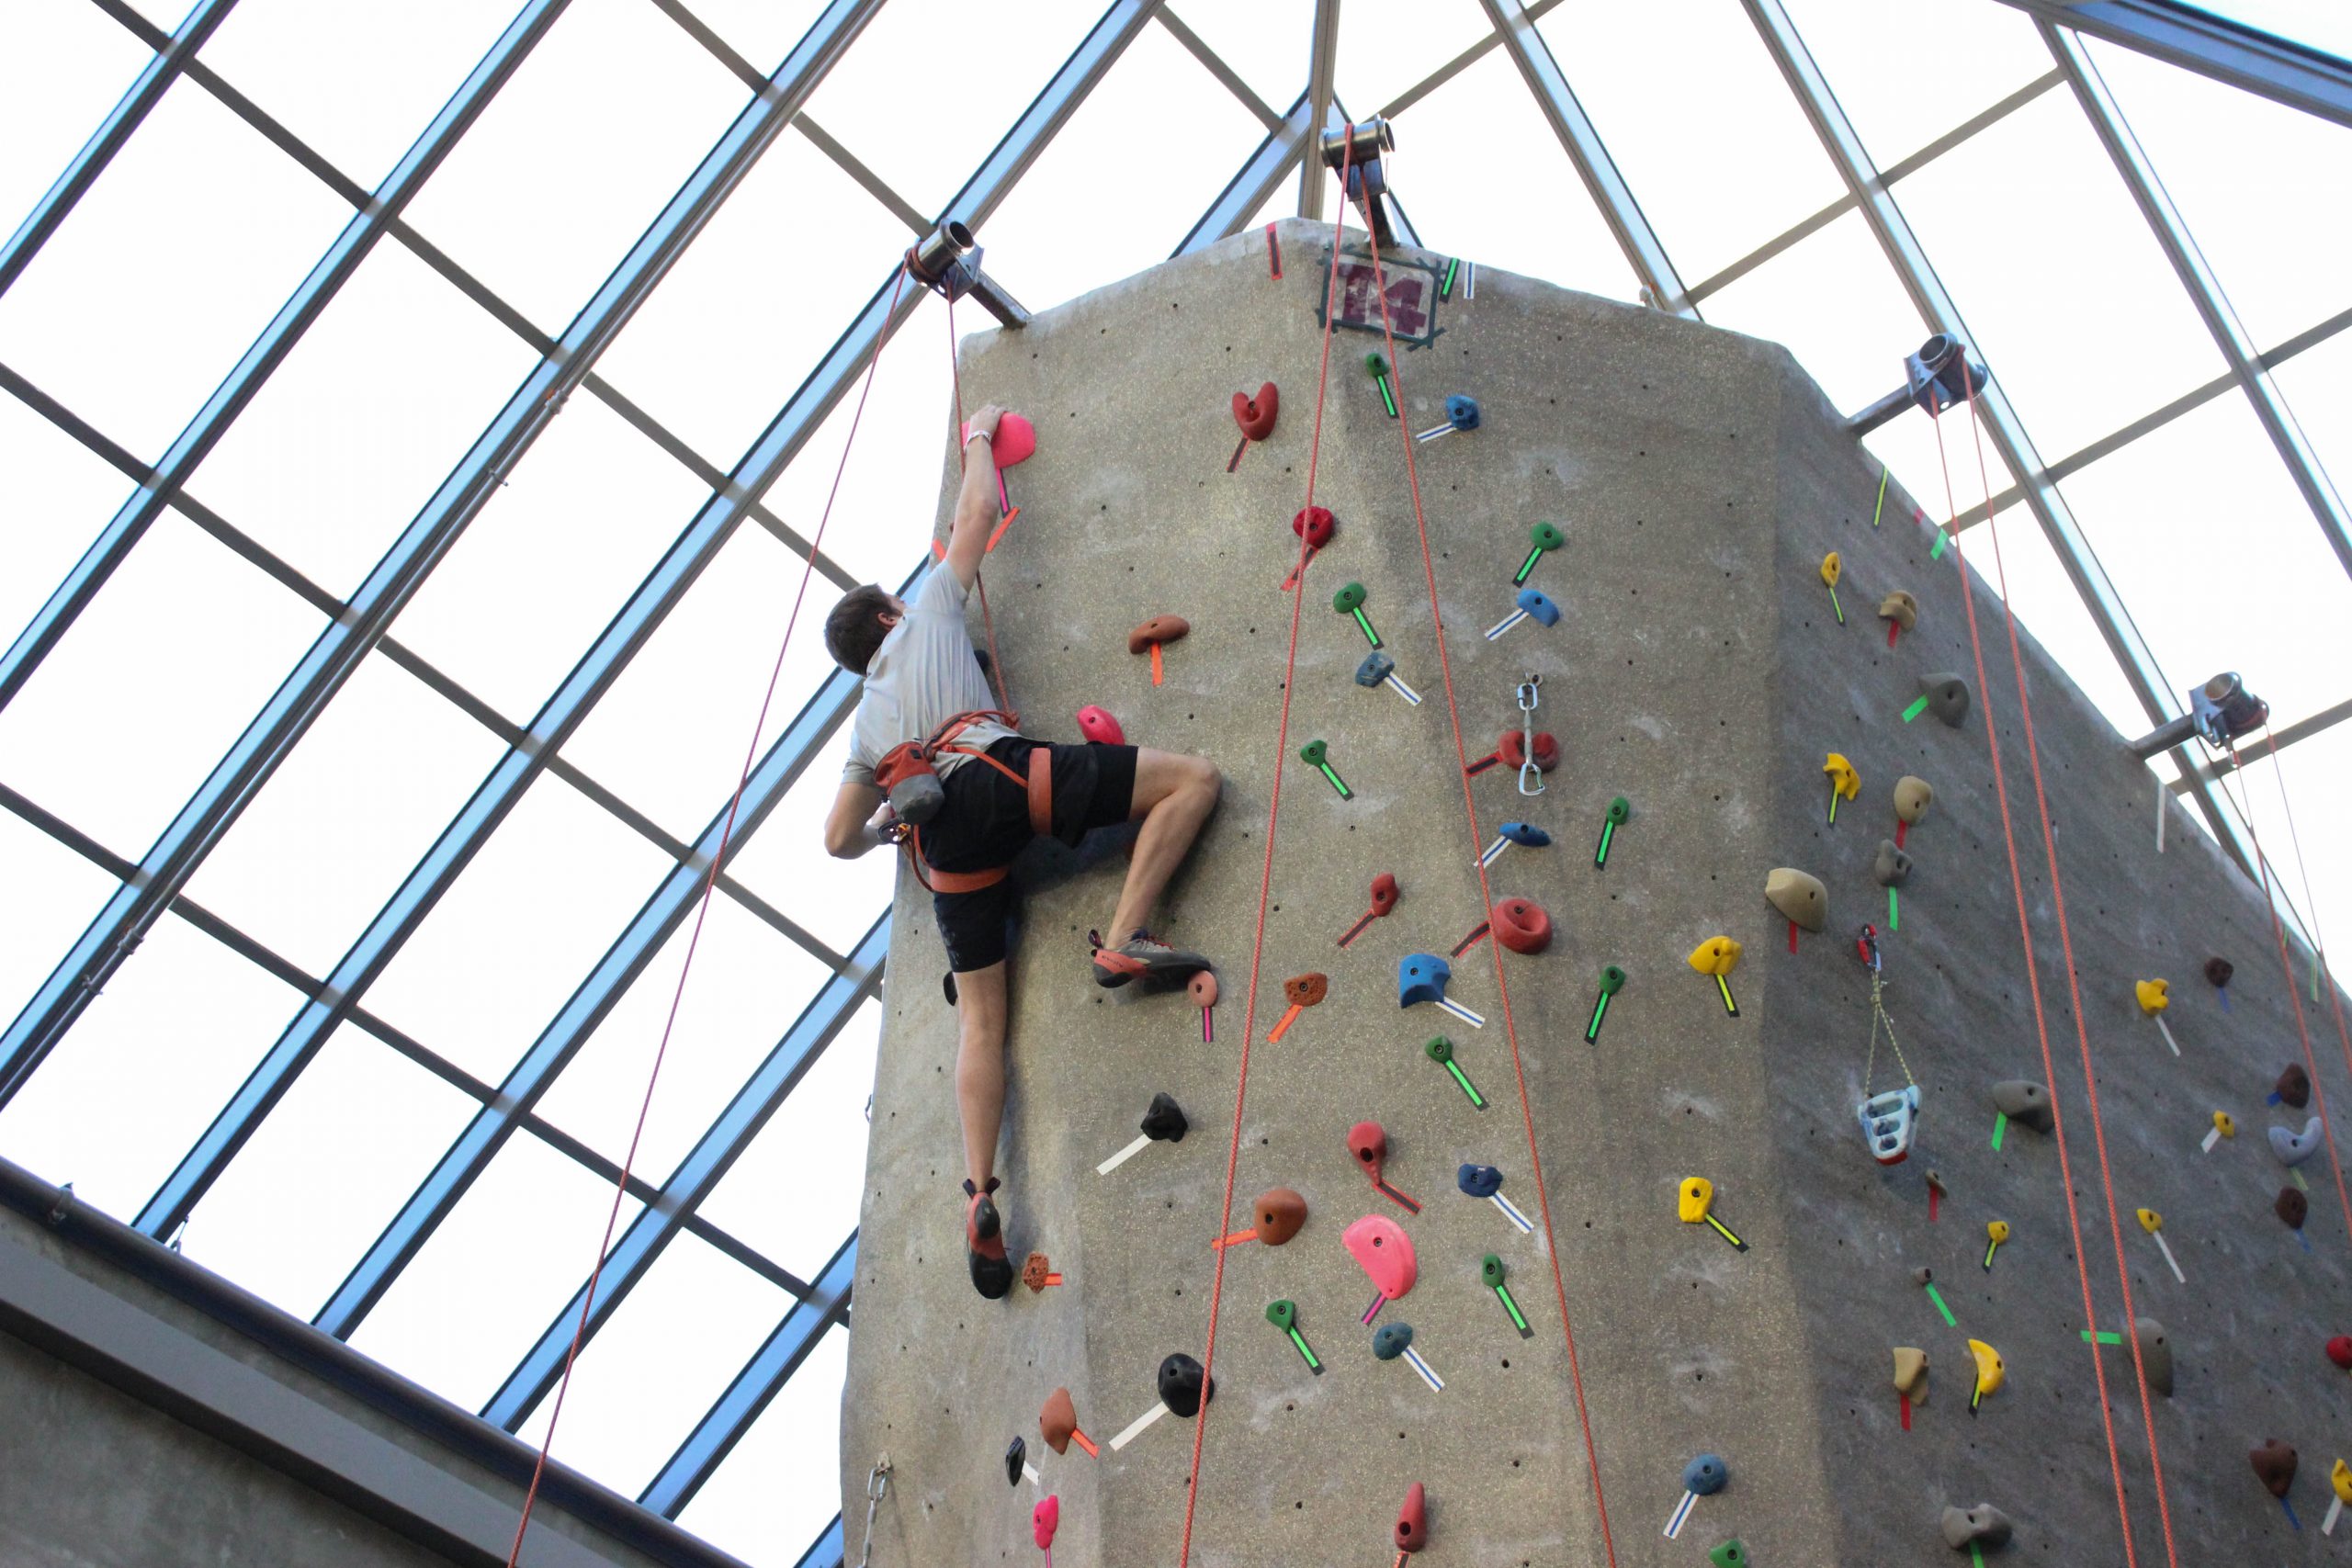 Rock Climbing Competition